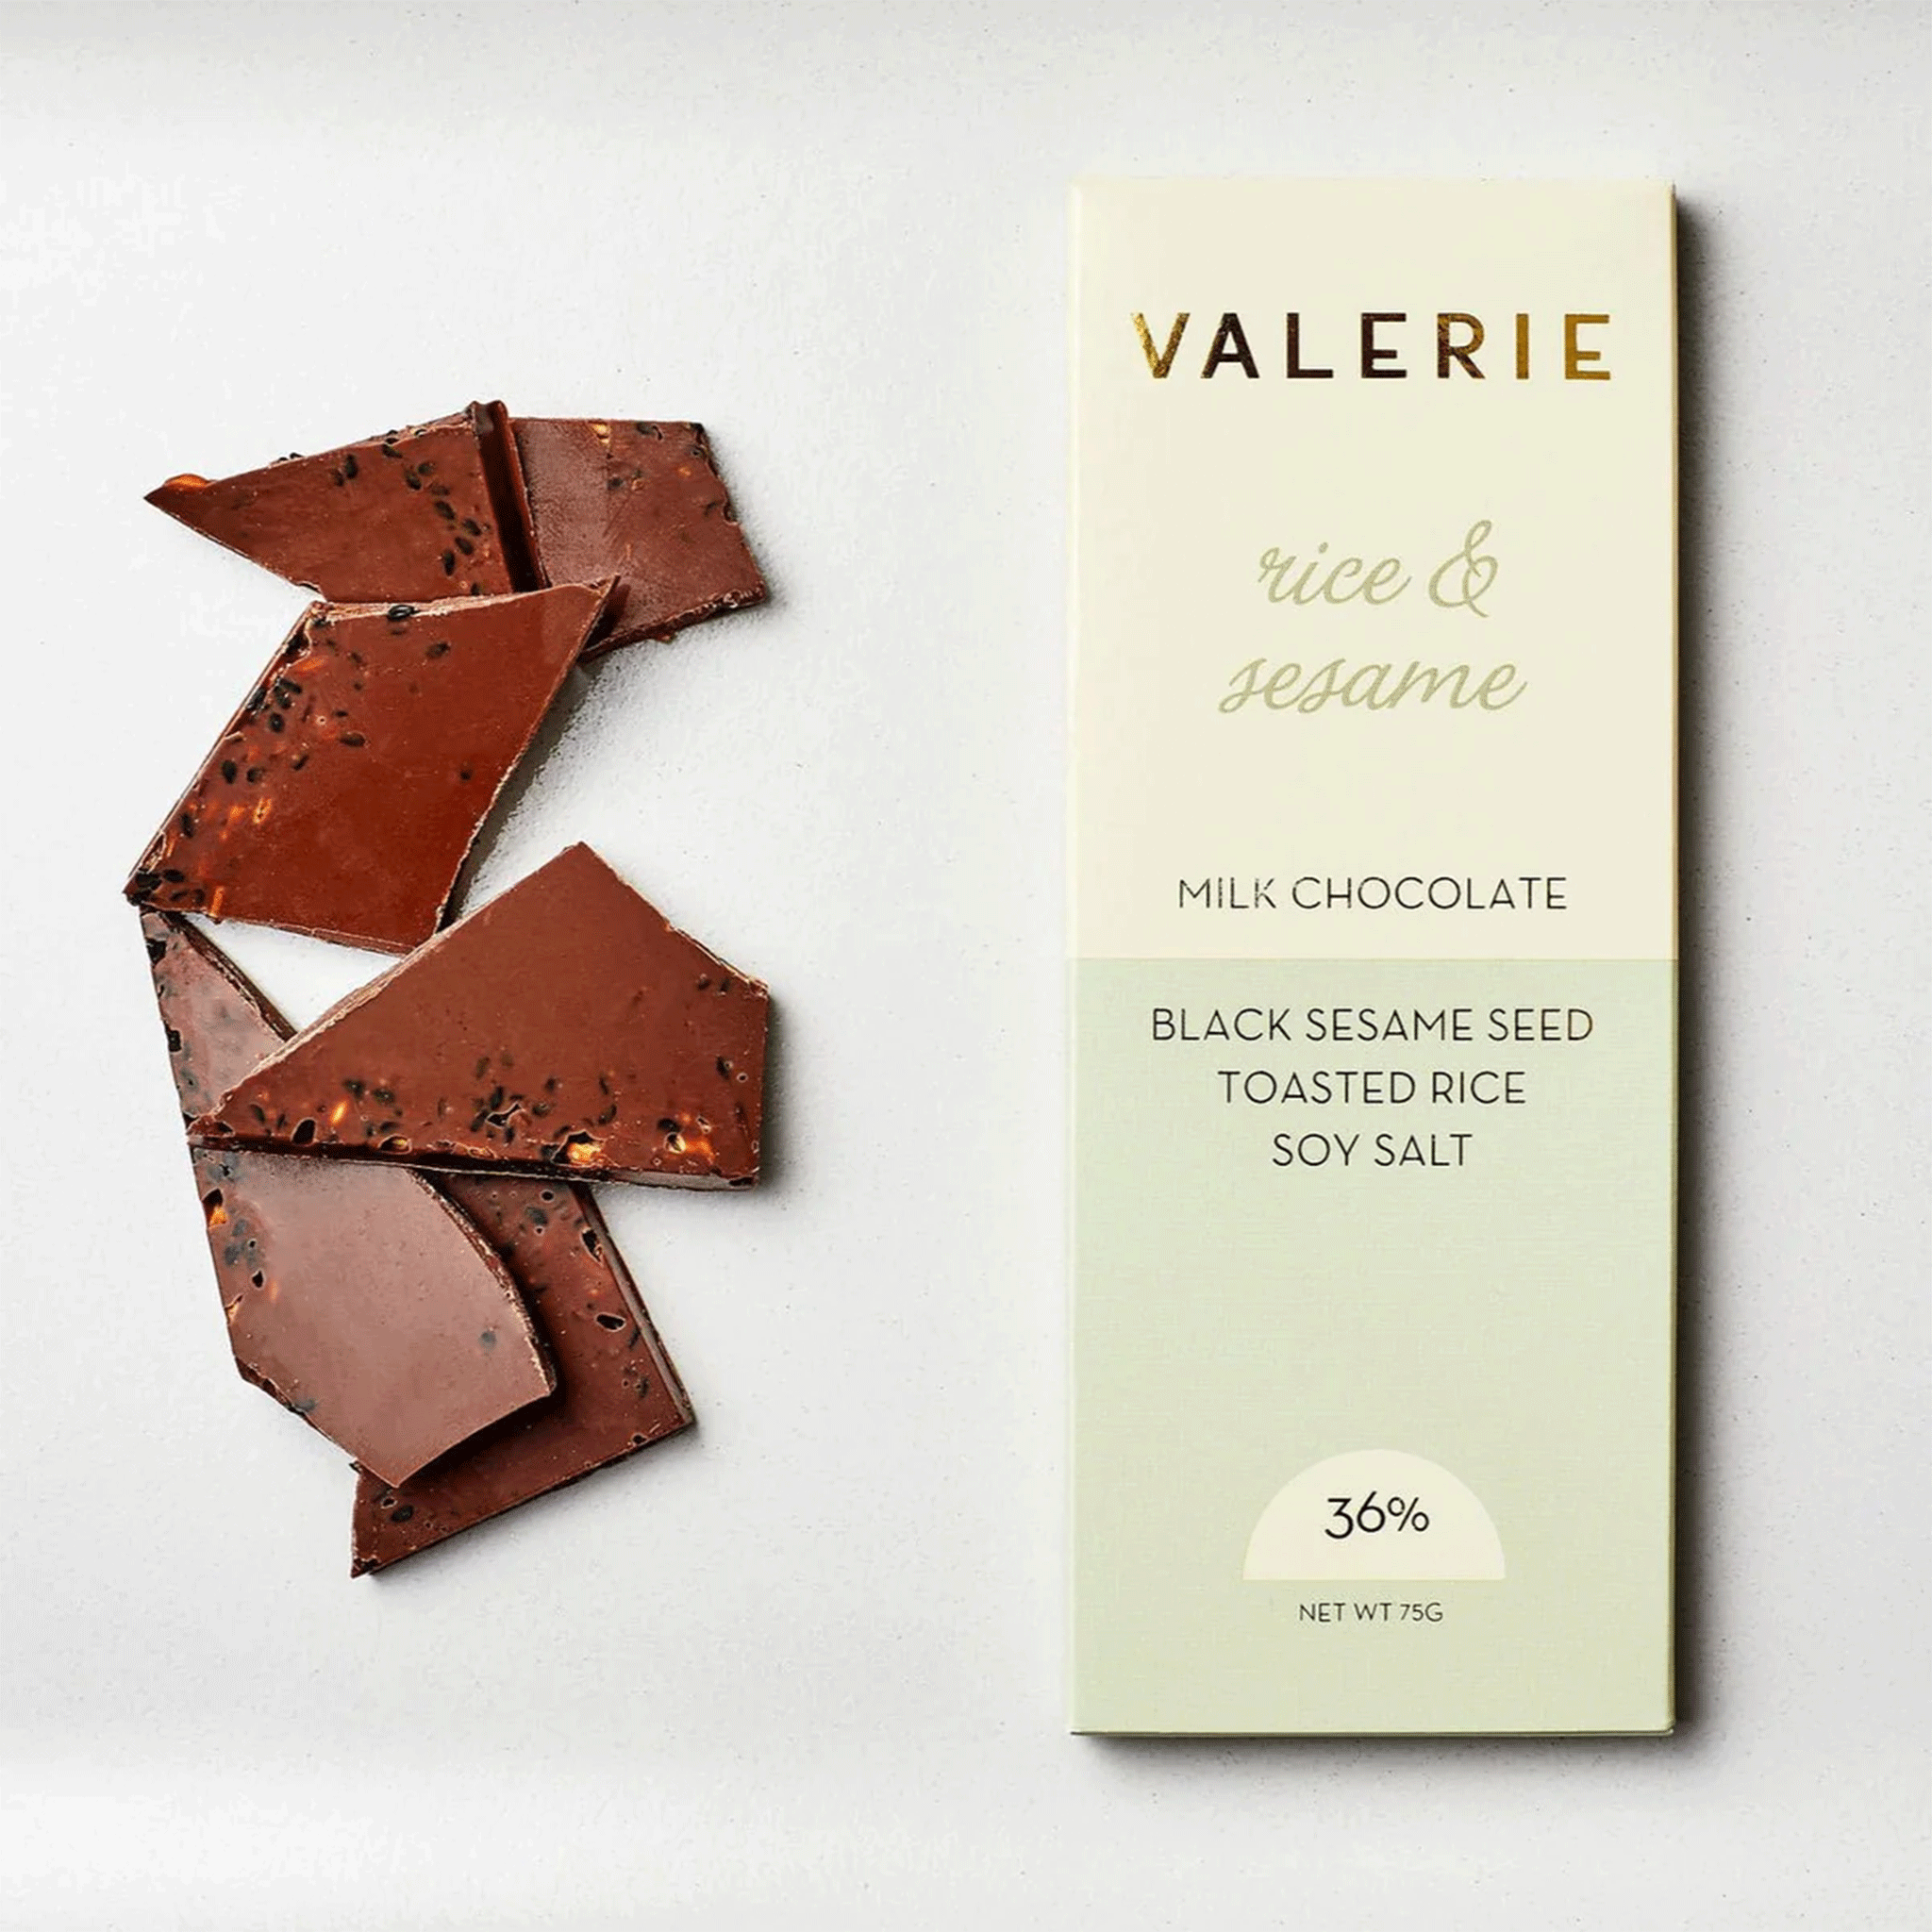 On a white background is a neutral colored bar of chocolate with gold foiled text that reads, "Valerie rice & sesame Milk Chocolate".